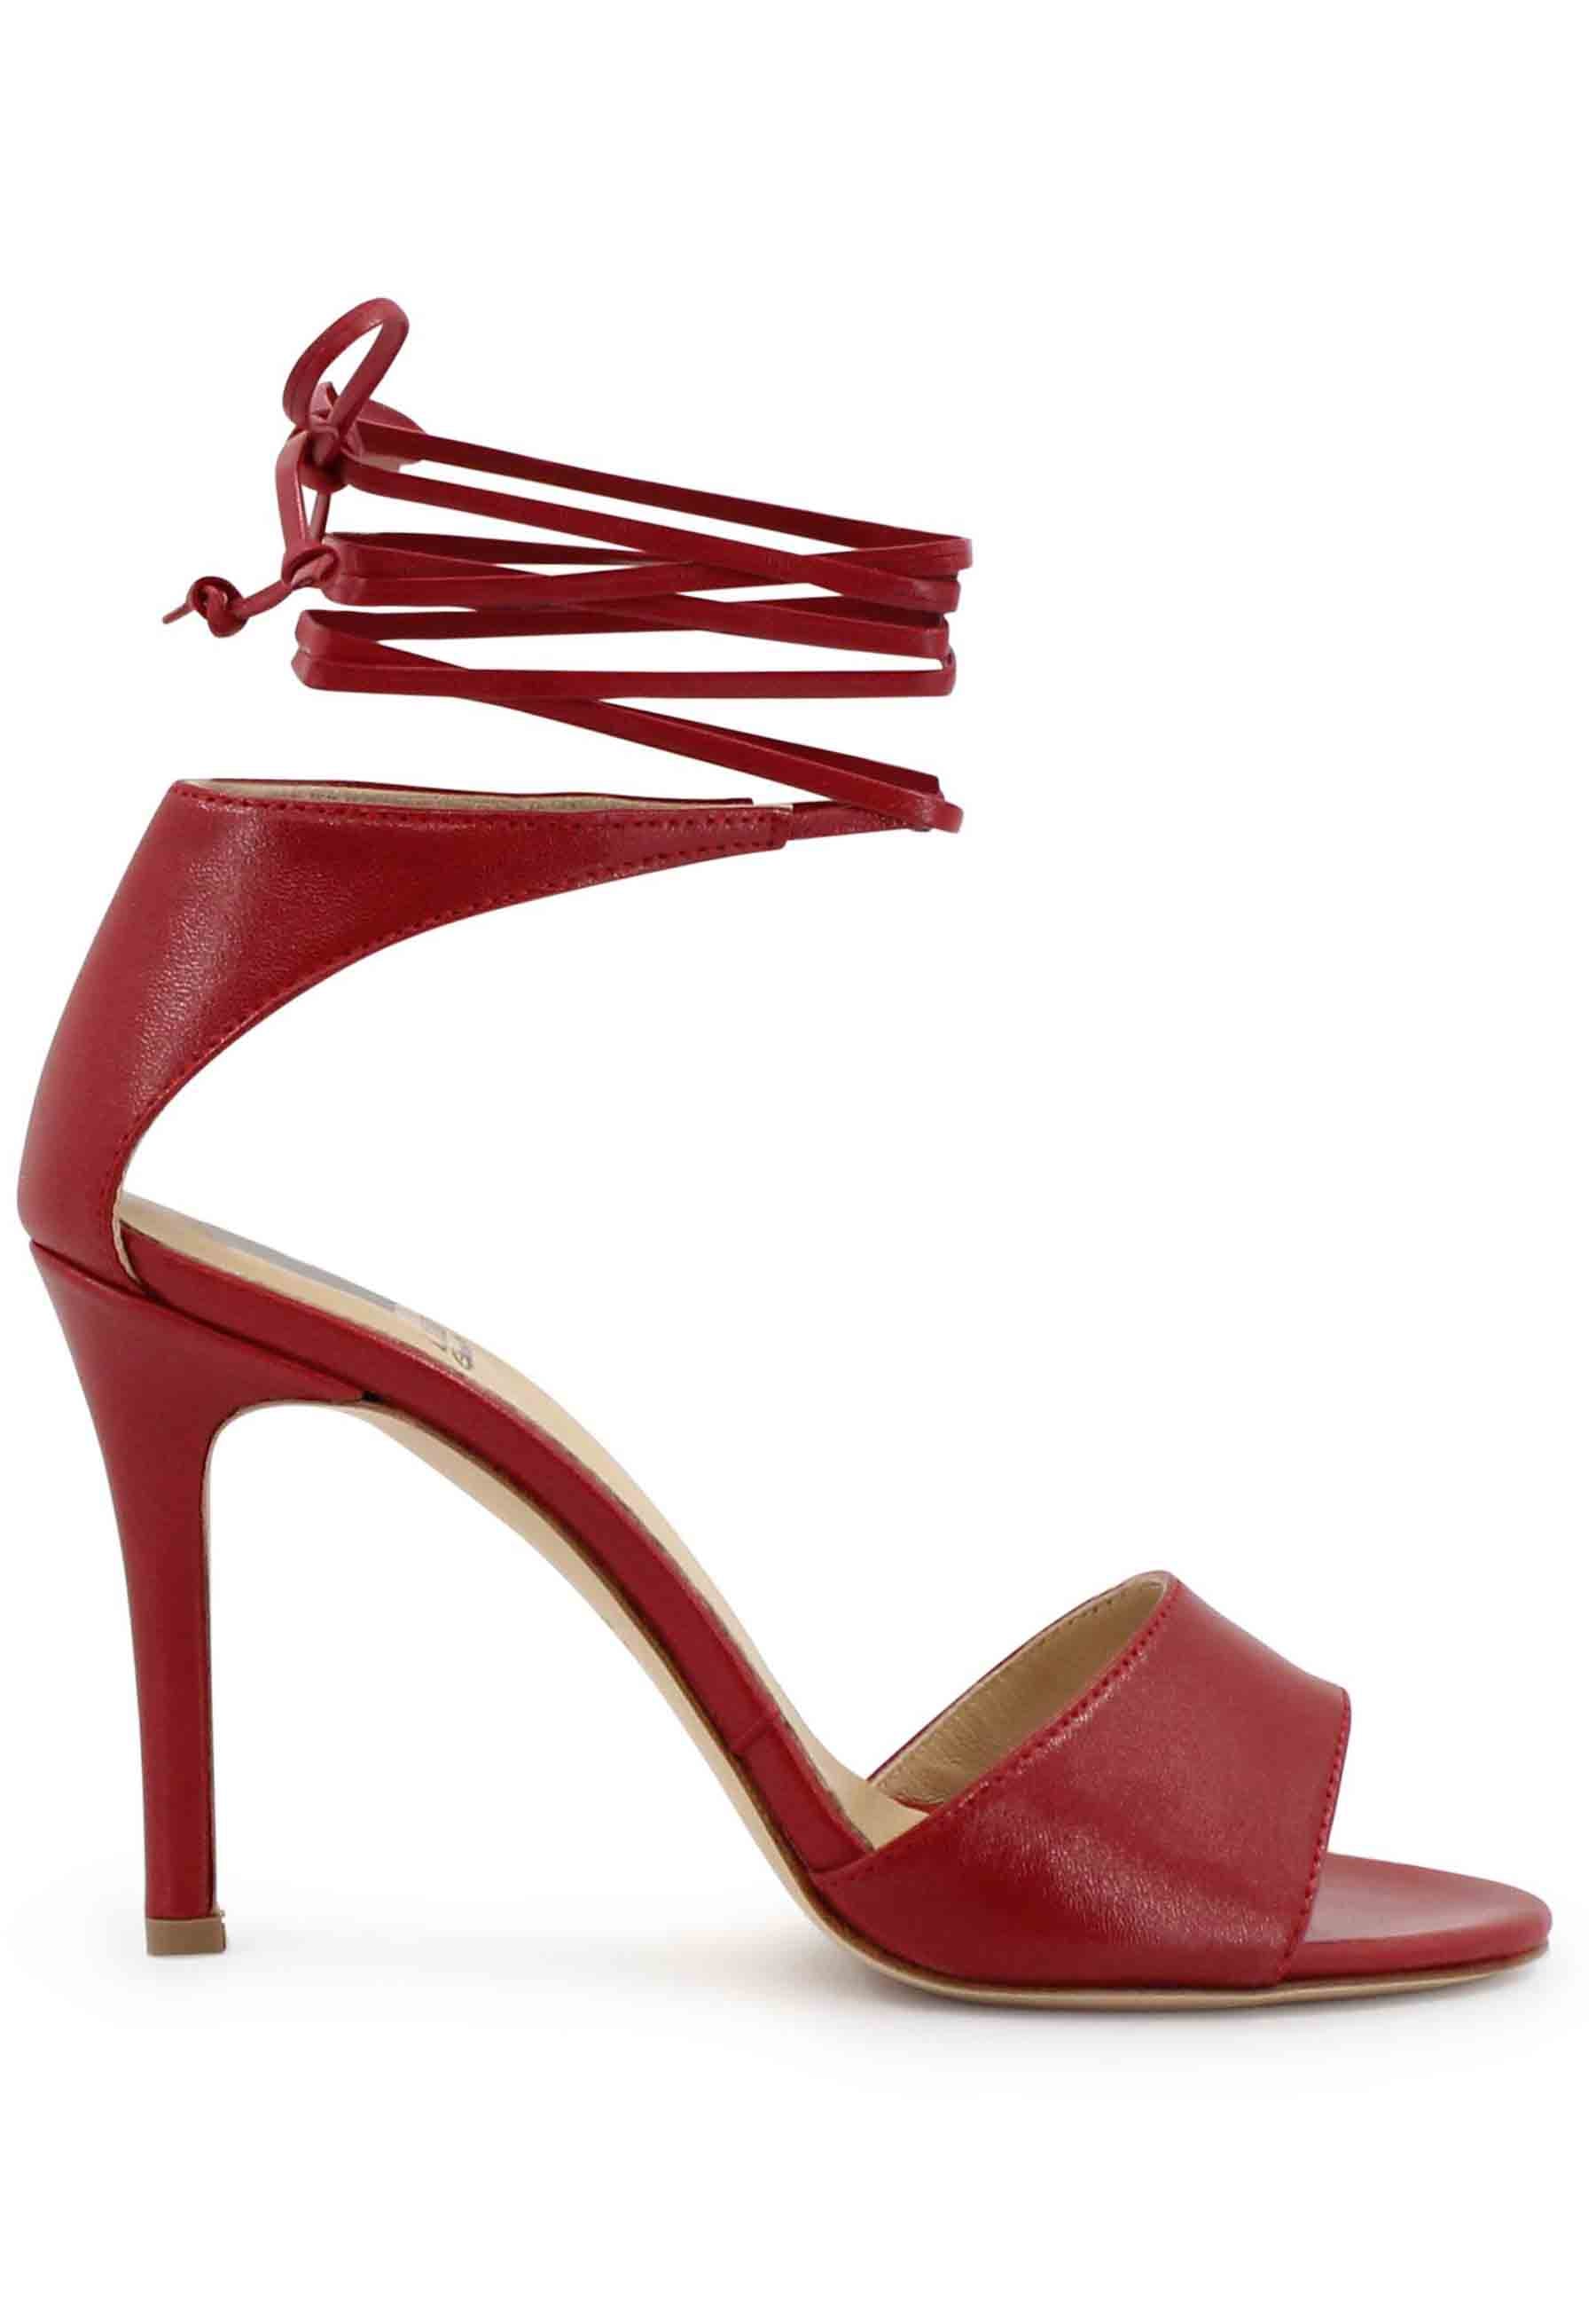 Women's red leather high heel sandals with ankle straps